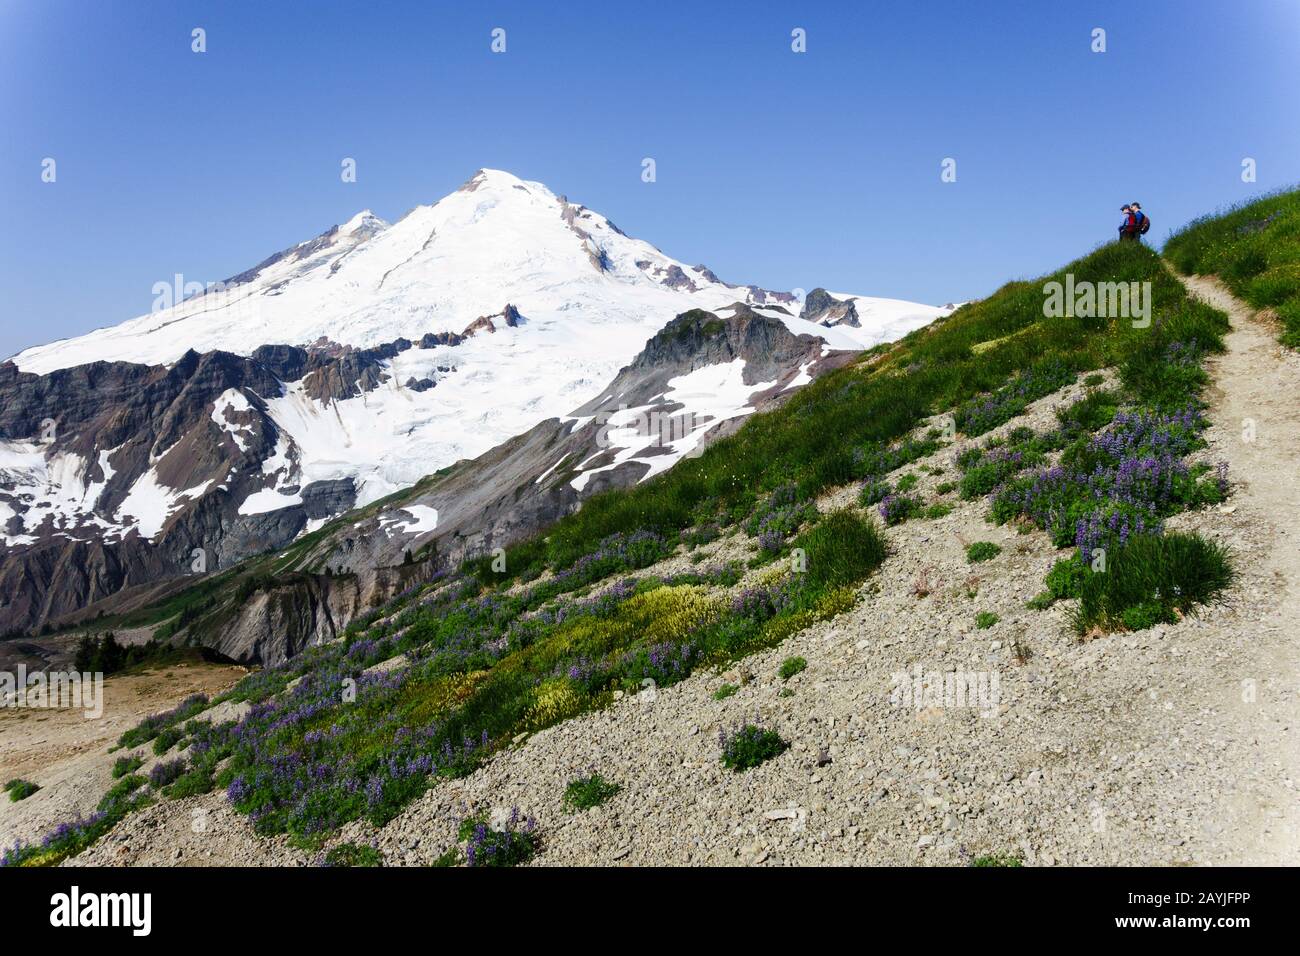 View on Mt Baker from Ptarmigan Ridge trail, Mt. Baker-Snoqualmie National Forest, Washington, United States Stock Photo